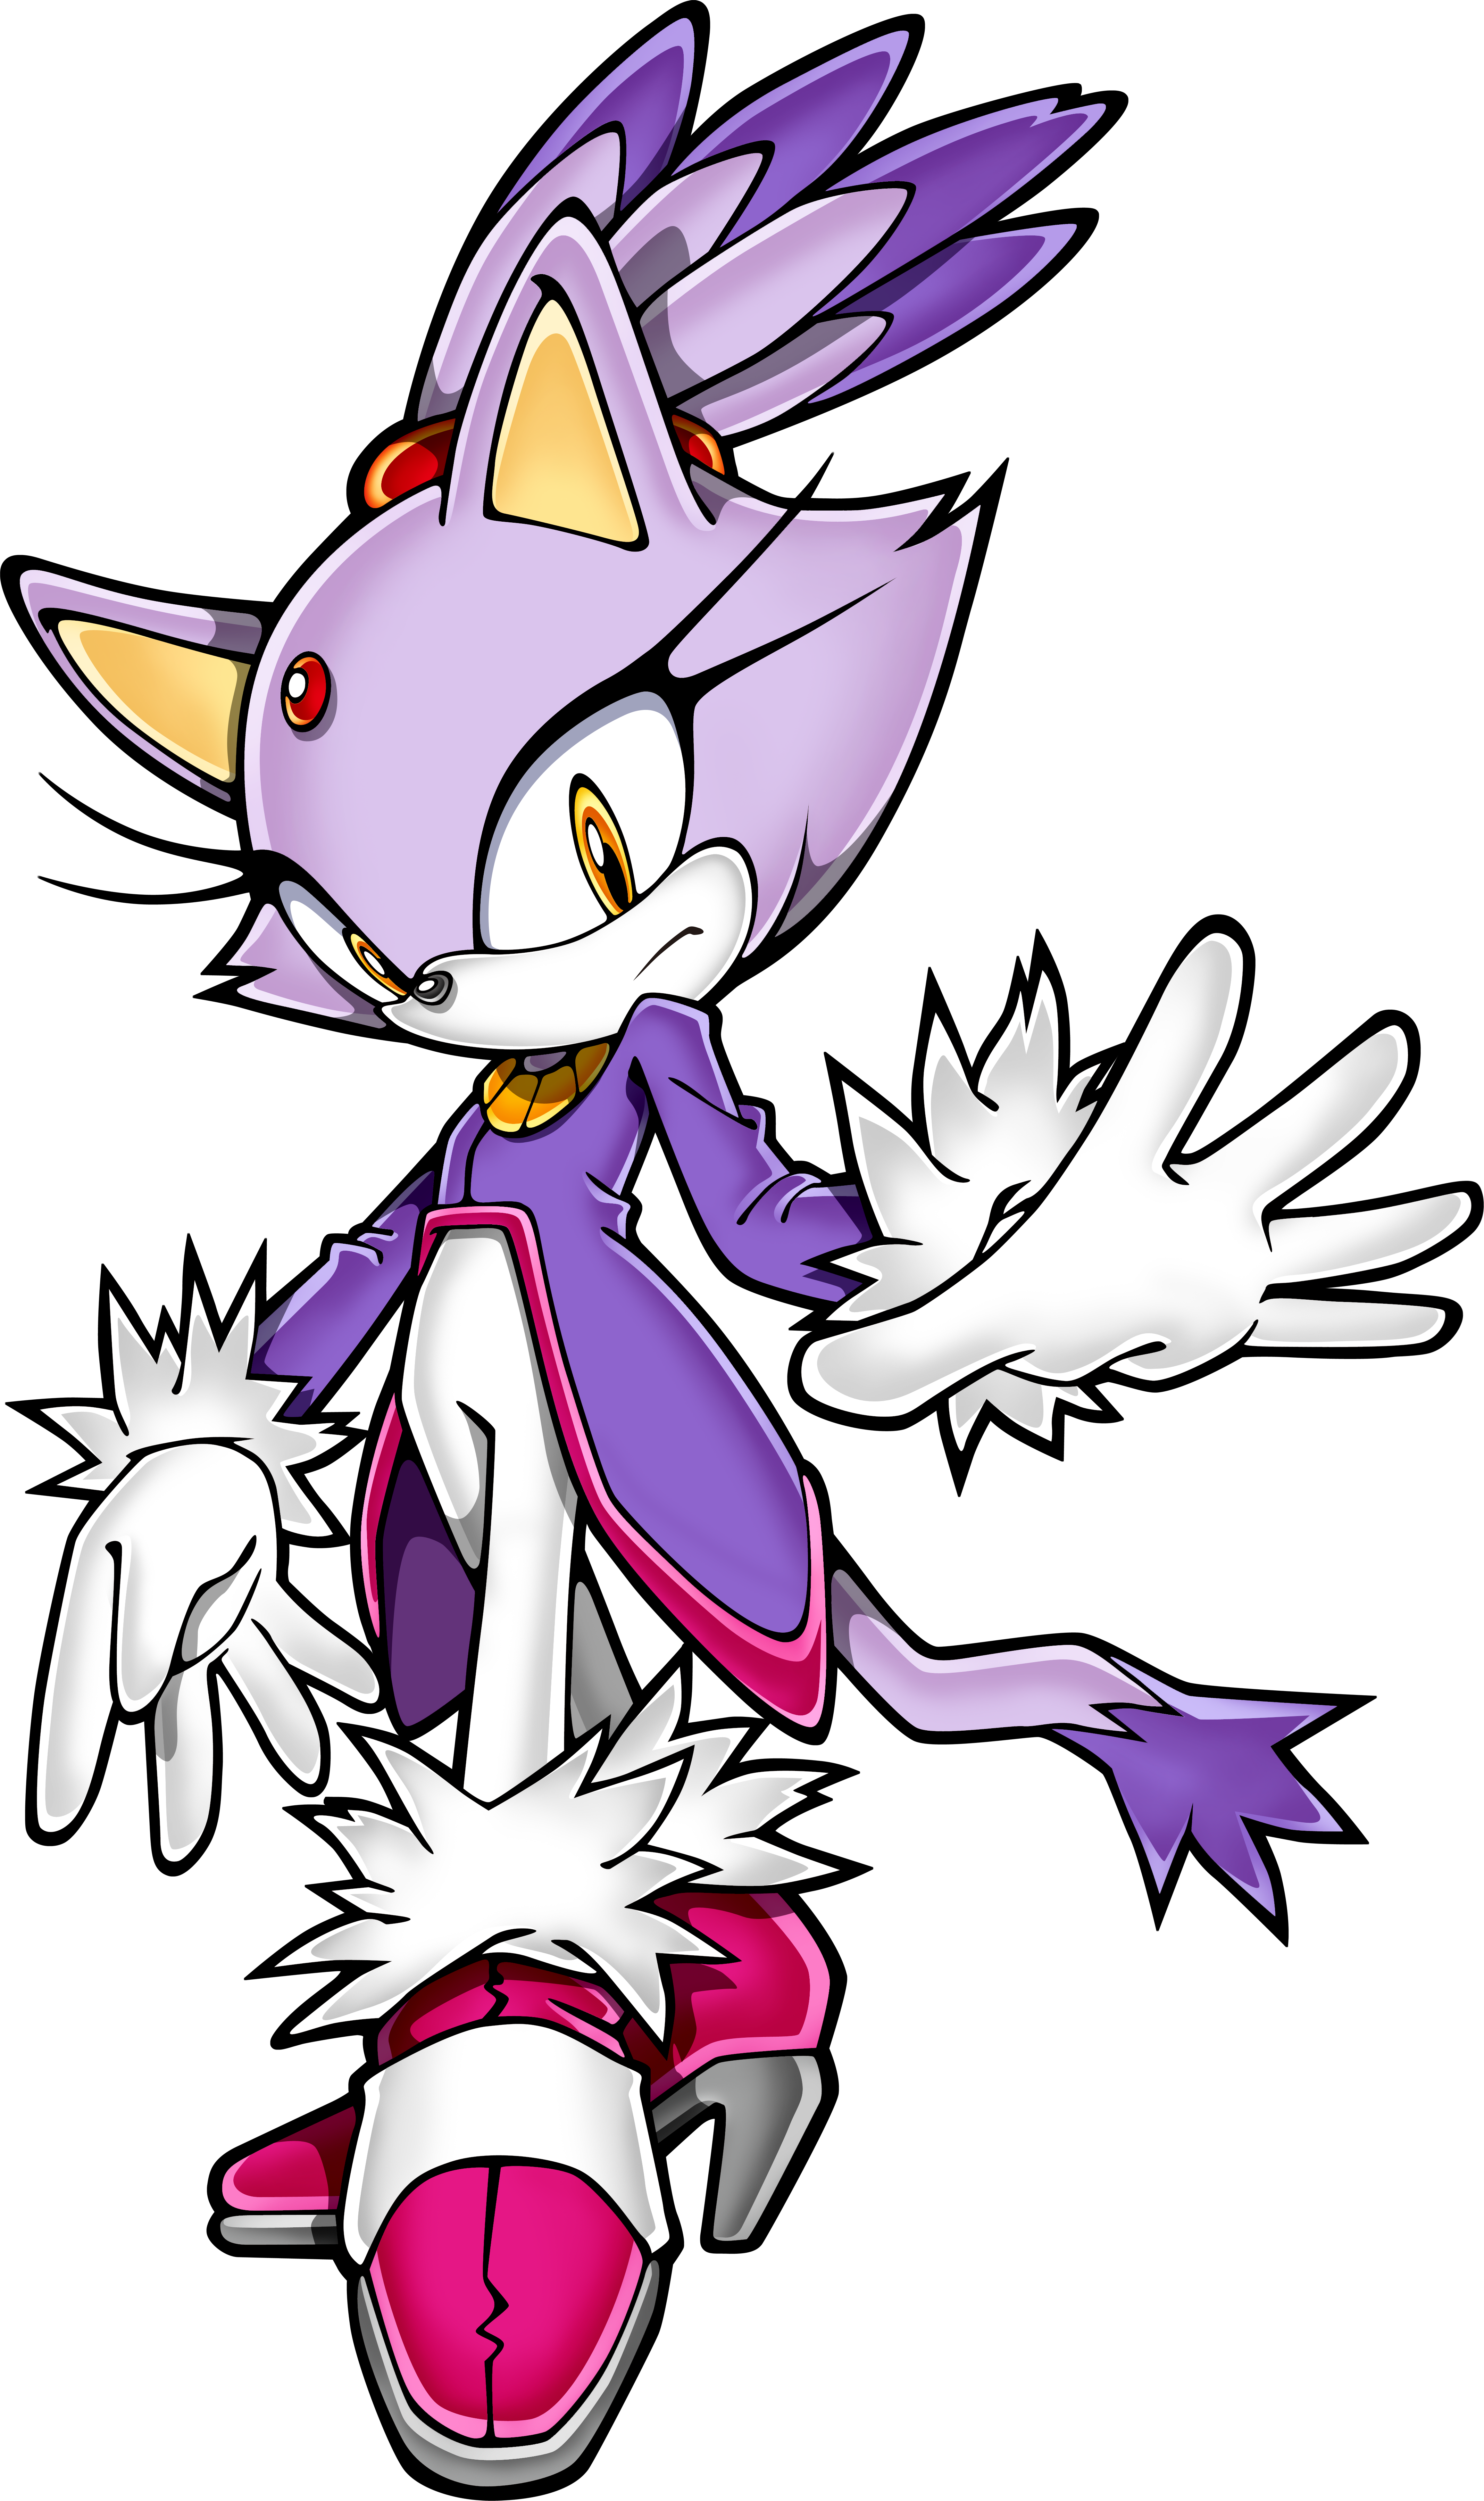 Blaze the Cat - Sonic News Network, the Sonic Wiki